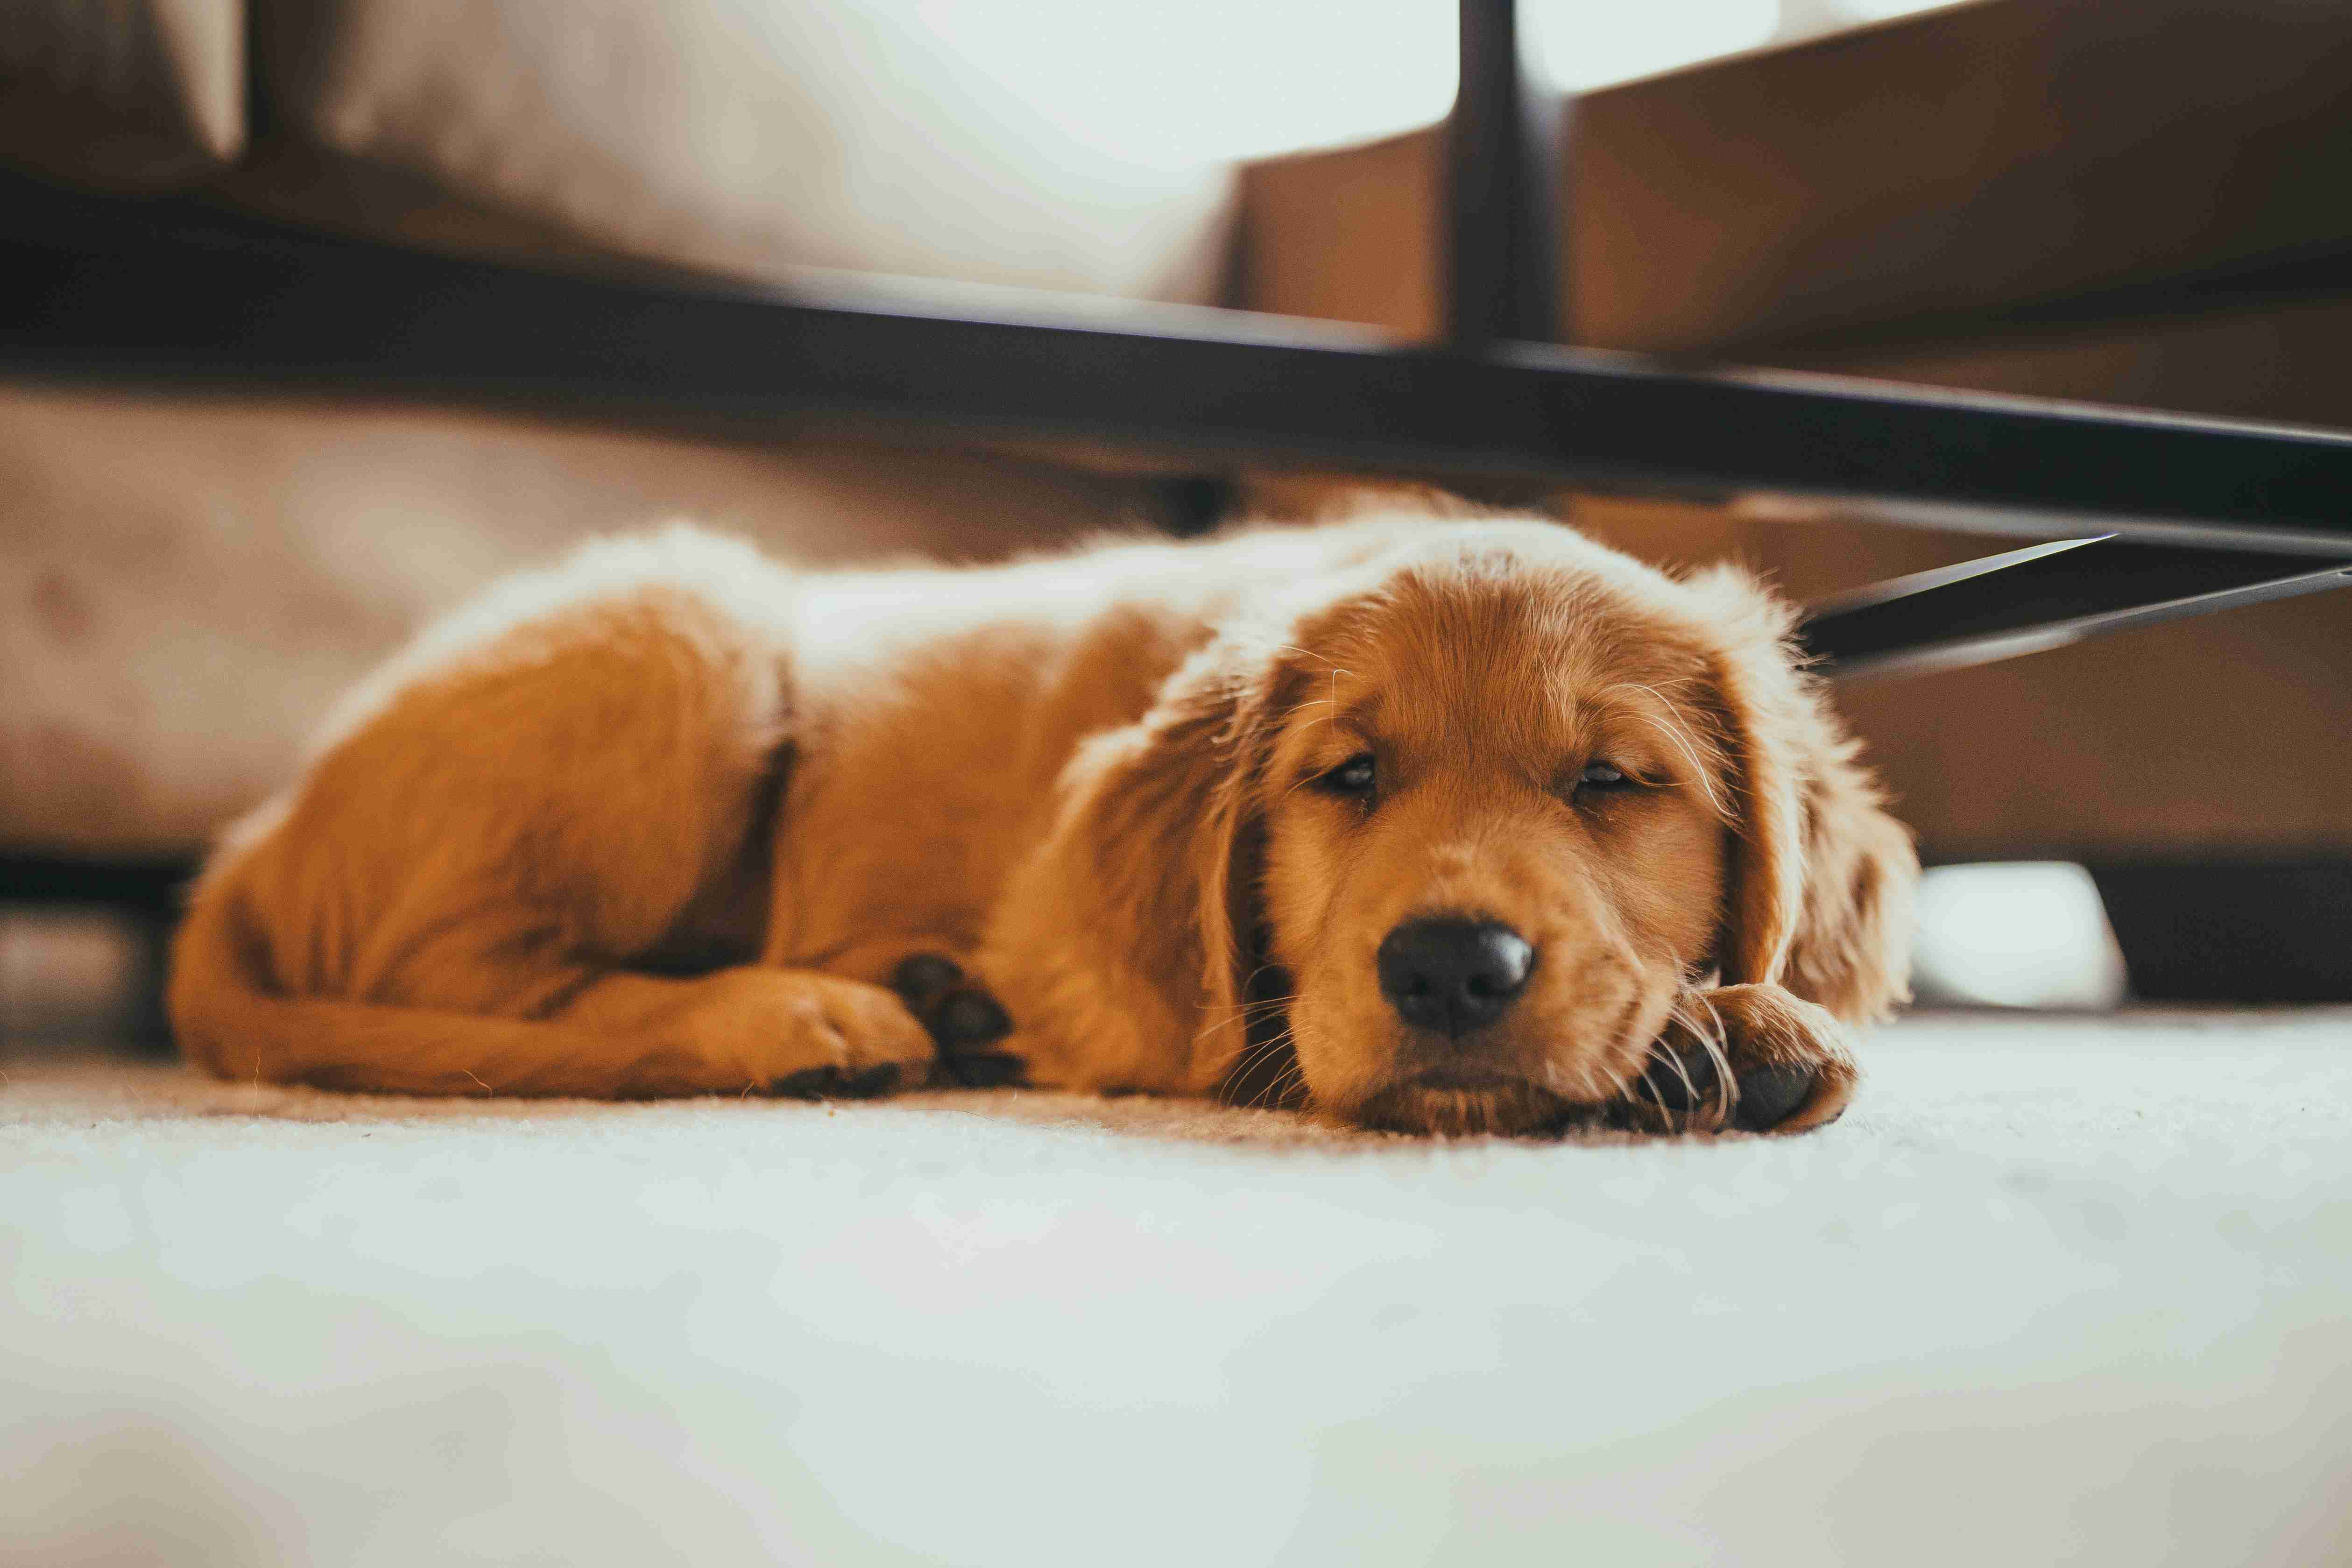 Are Golden Retrievers prone to any specific eye issues?